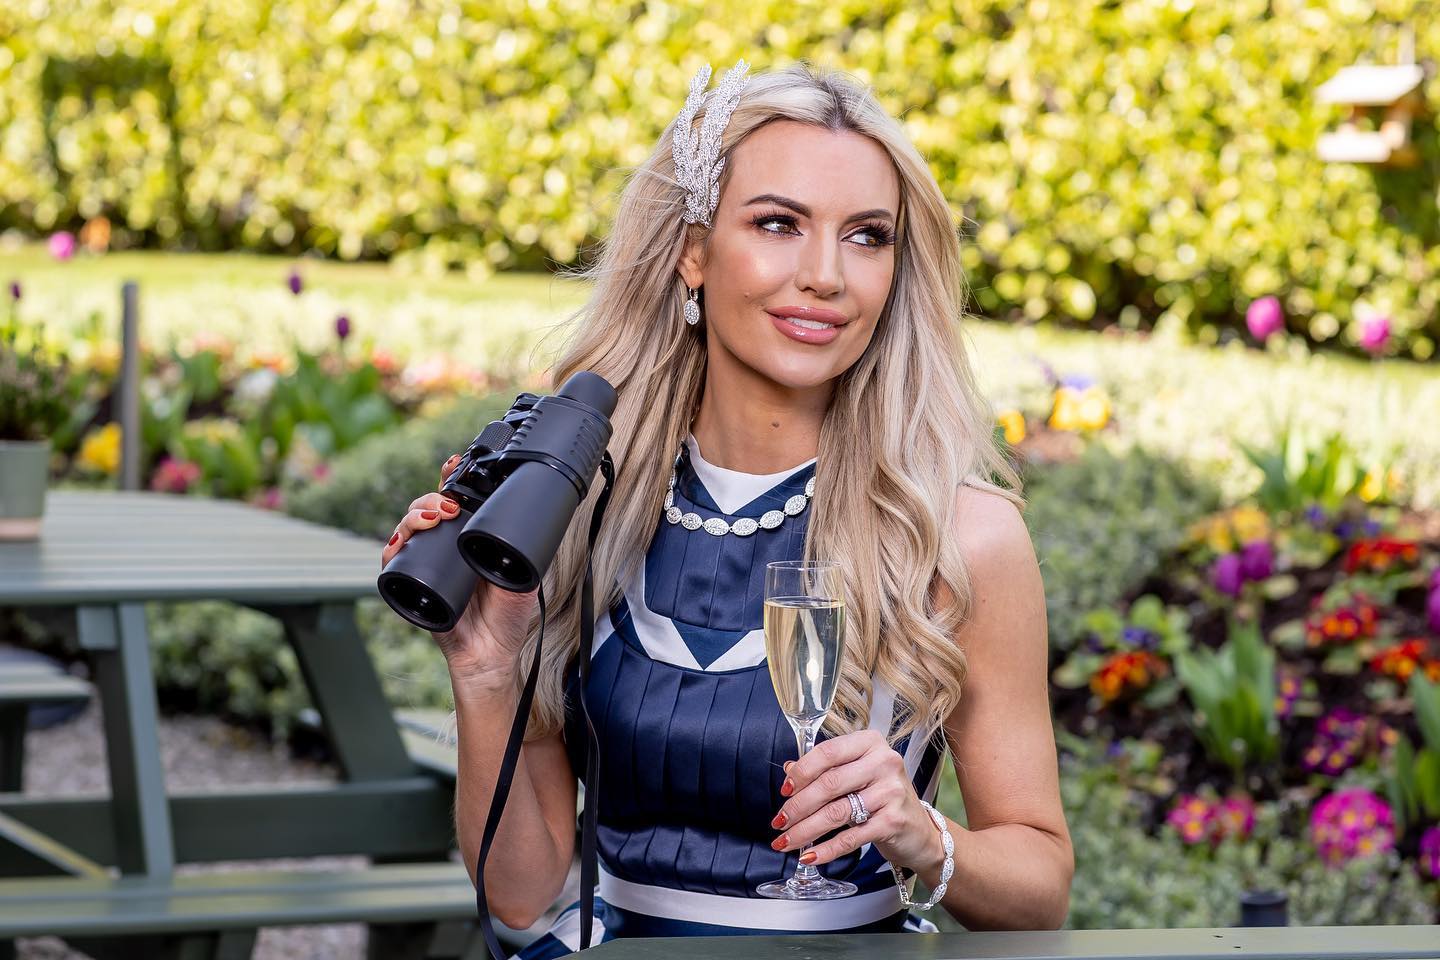 Our ladies day judge @rosanna_davison gives her top tips ahead of our Royal Ascot Trials & Ladies Day this Sunday! Read them through the link in our bio. 
#NaasRC #LadiesDay #royalascottrialsday